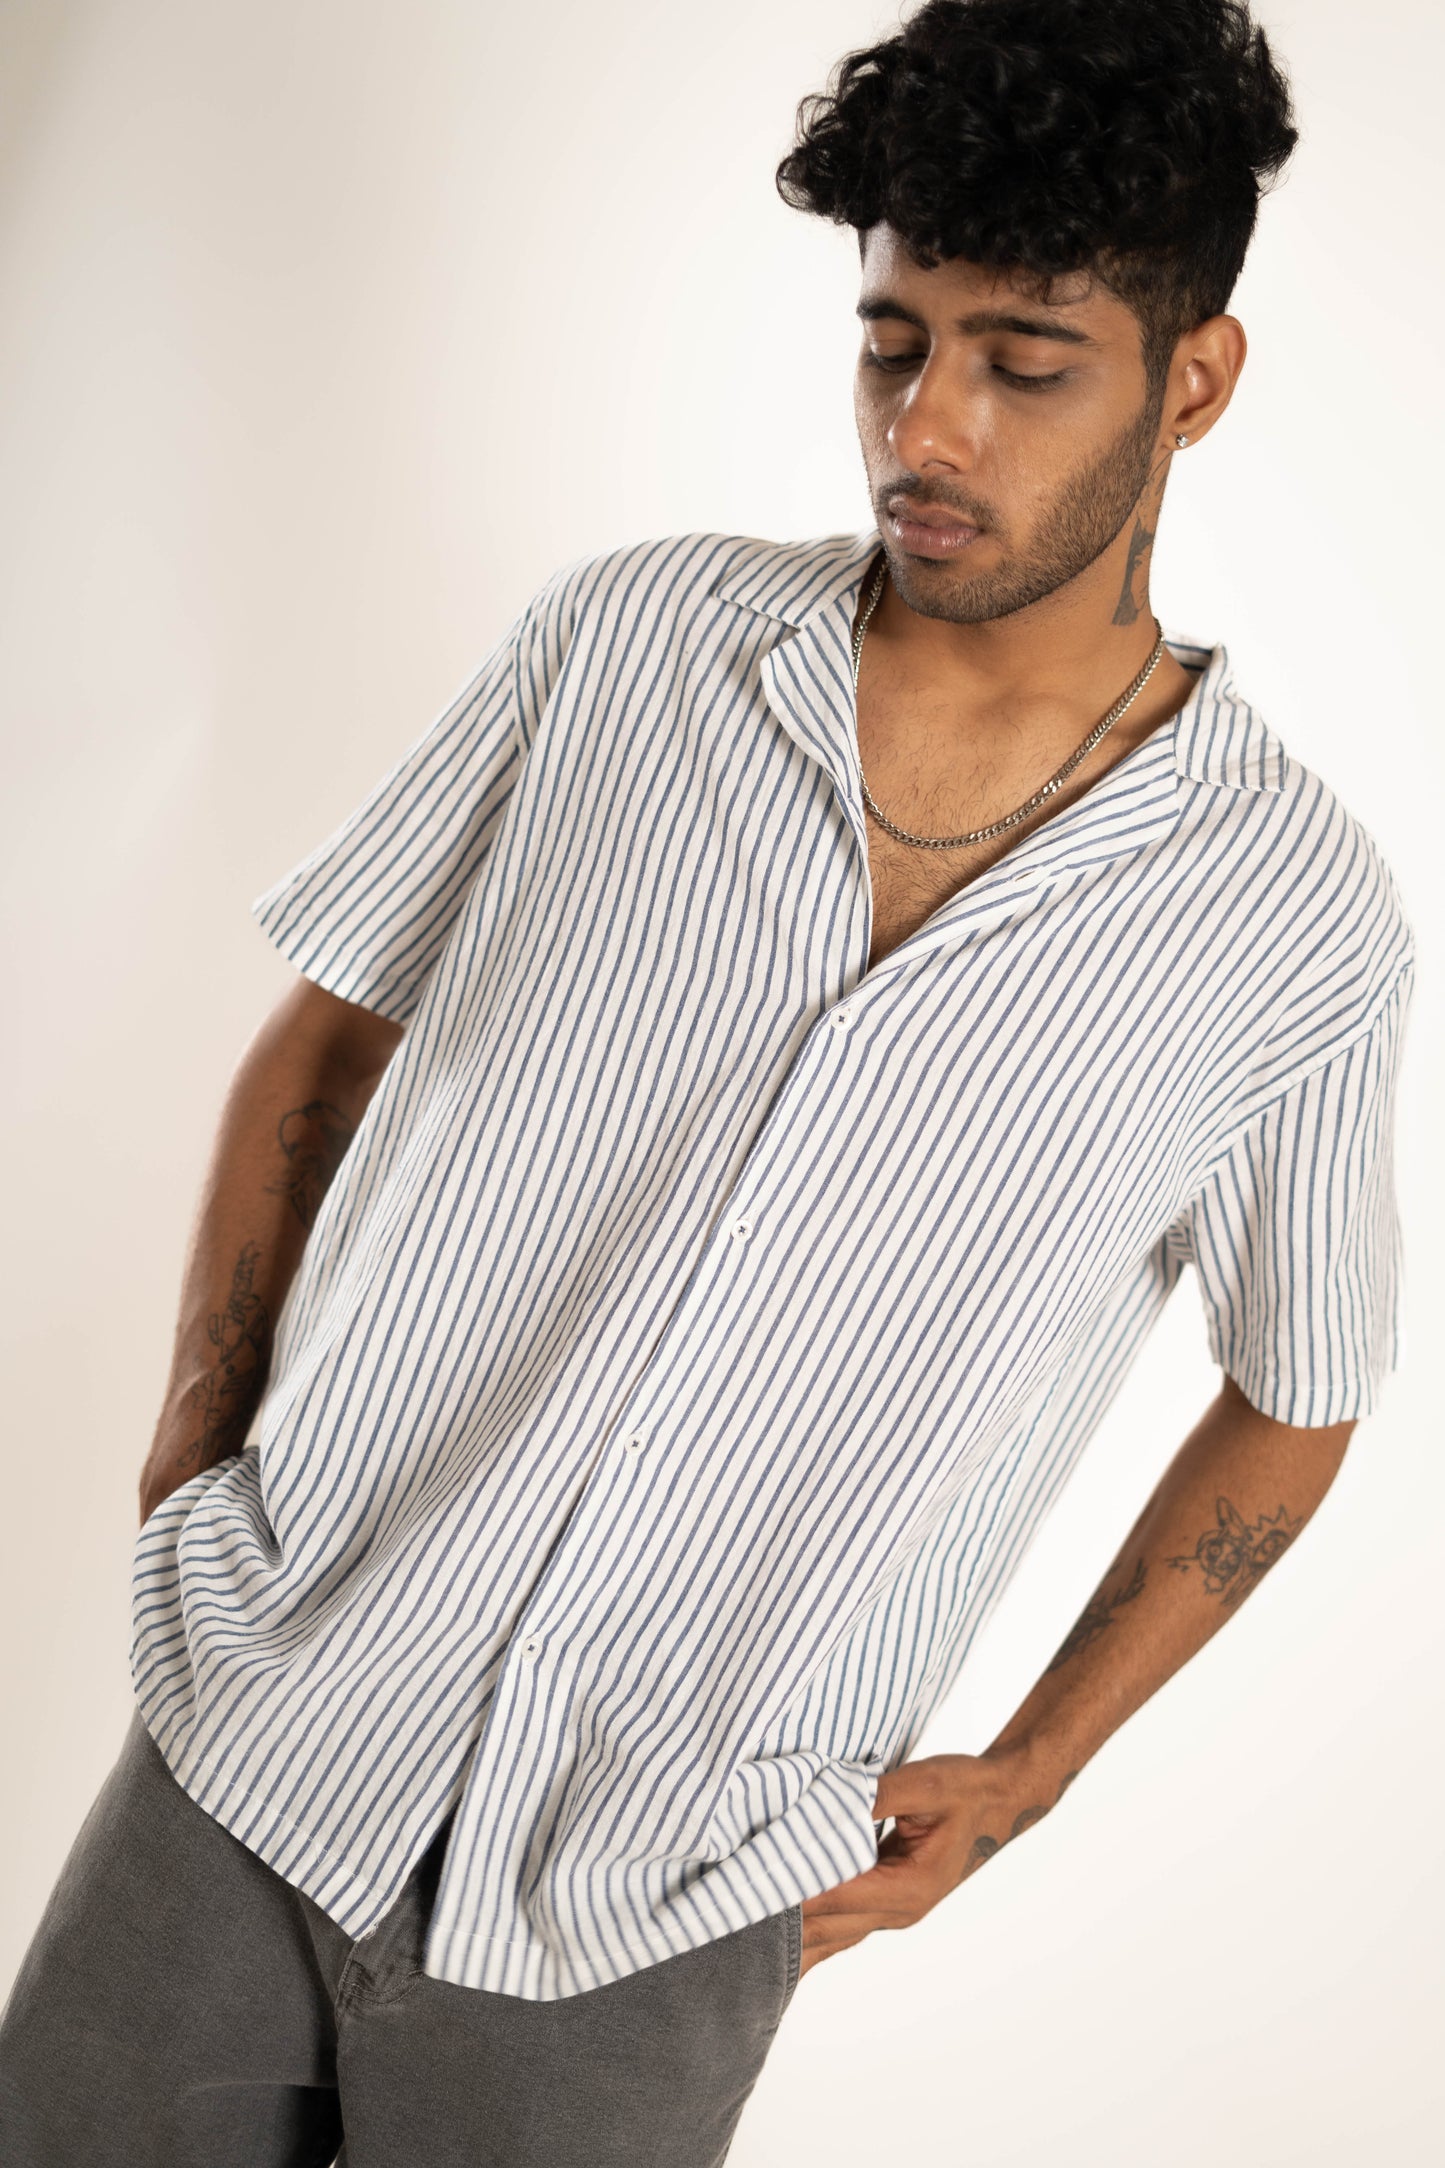 Men's Relaxed Fit Short Sleeves White Shirt With Blue Strips